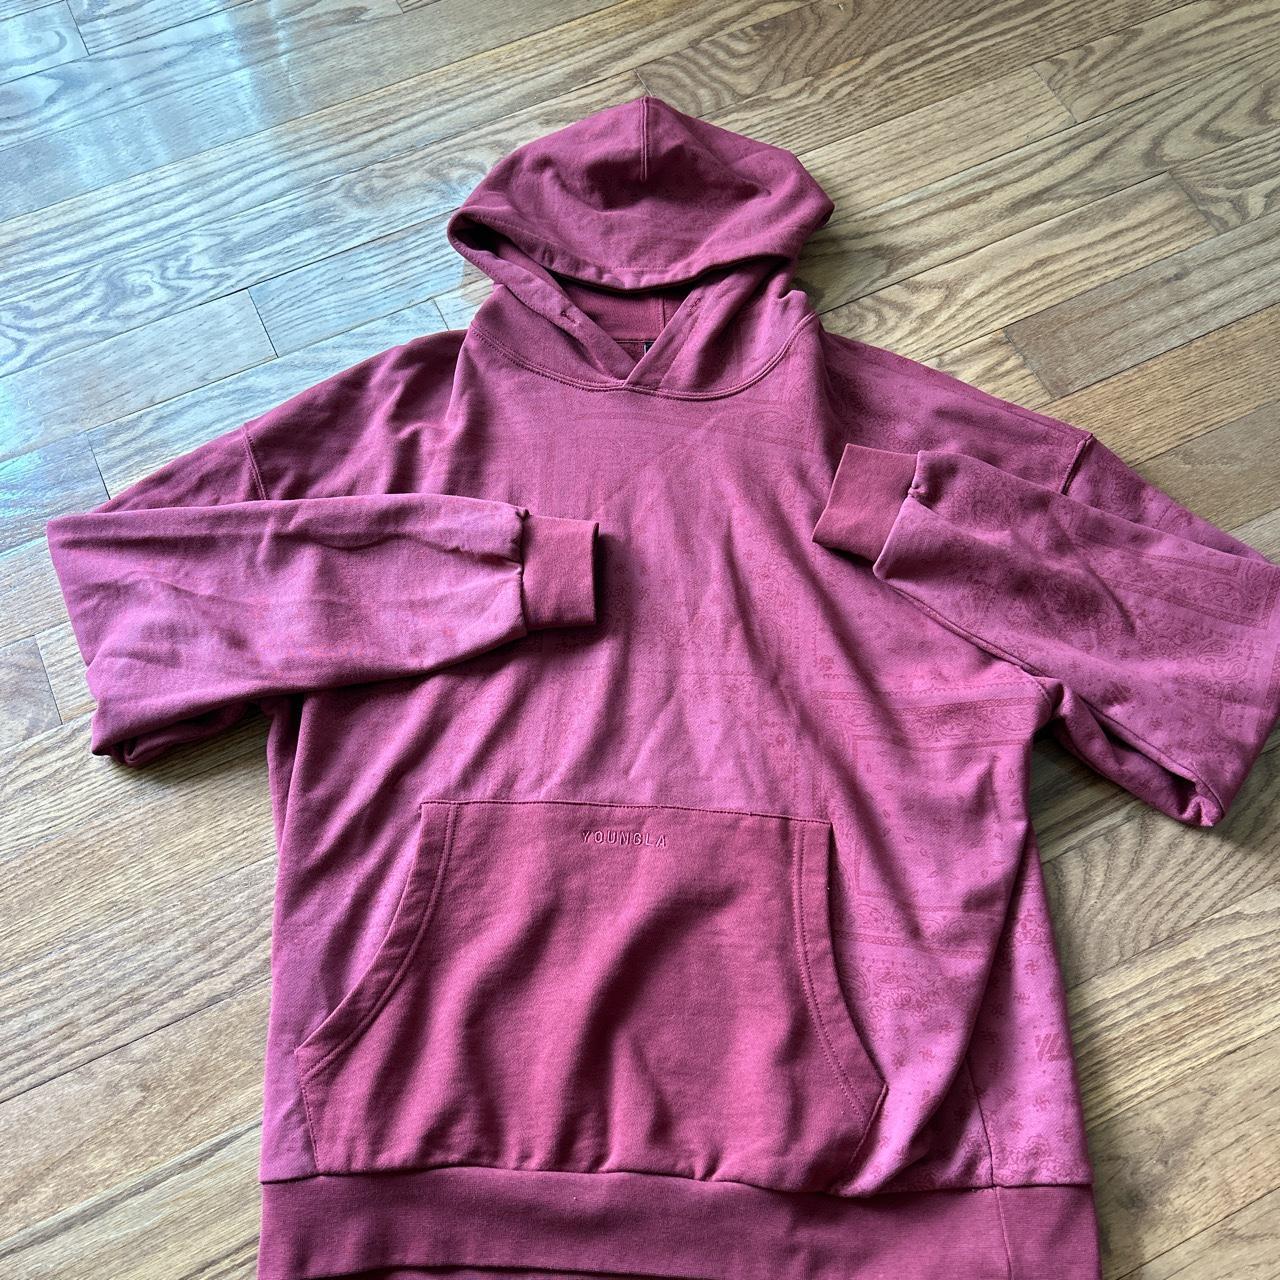 Youngla Paisley Pattern Hoodie Size XL Sold out - Depop